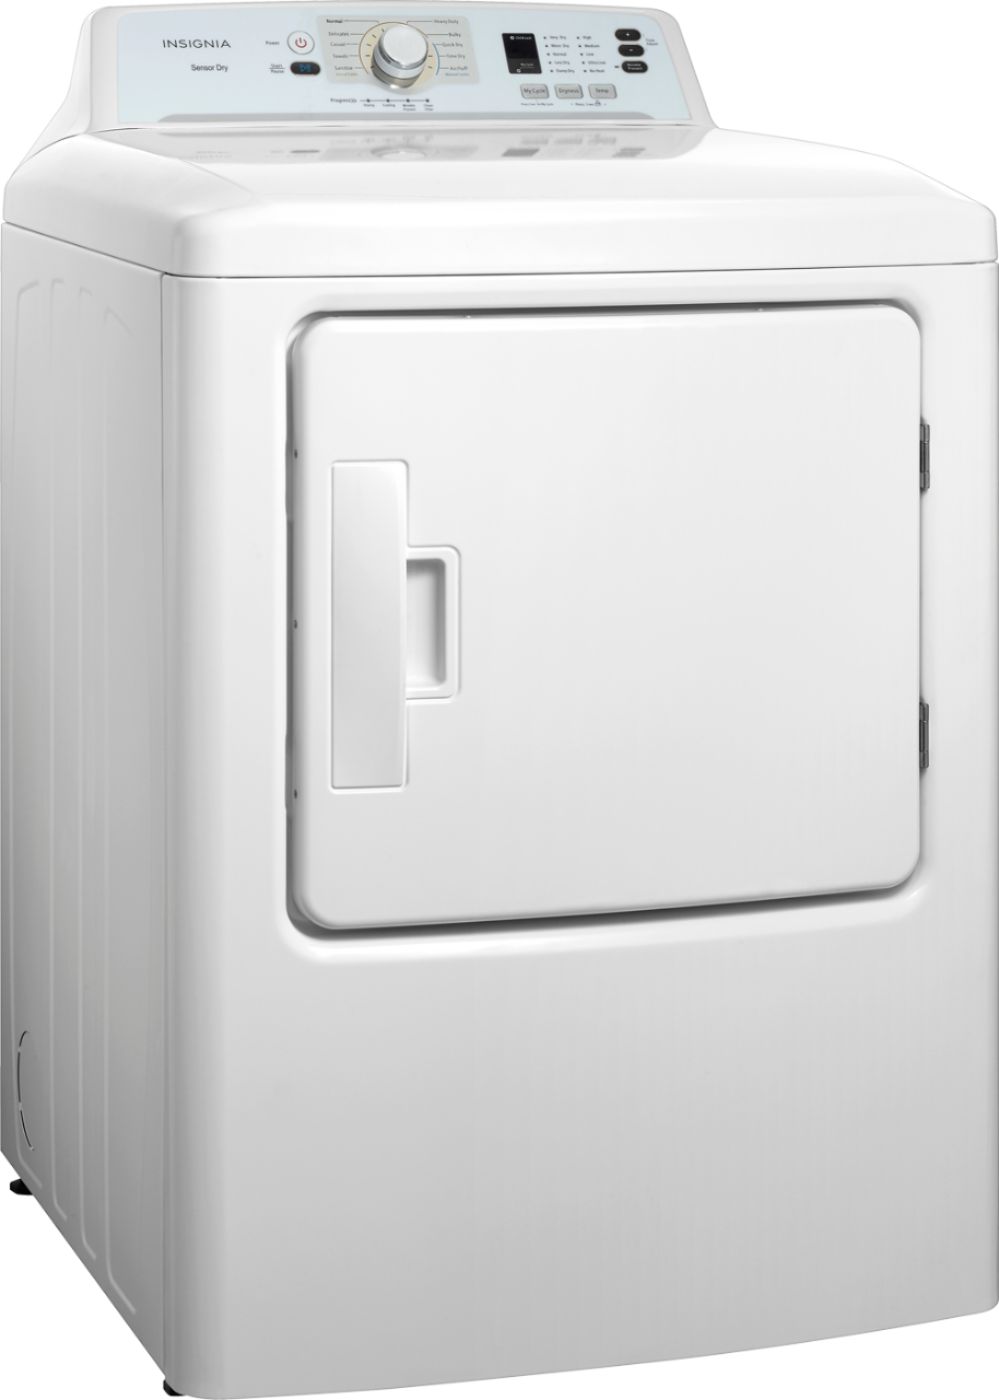 Angle View: Whirlpool - 7.0 Cu. Ft. Gas Dryer with Advanced Moisture Sensing - White